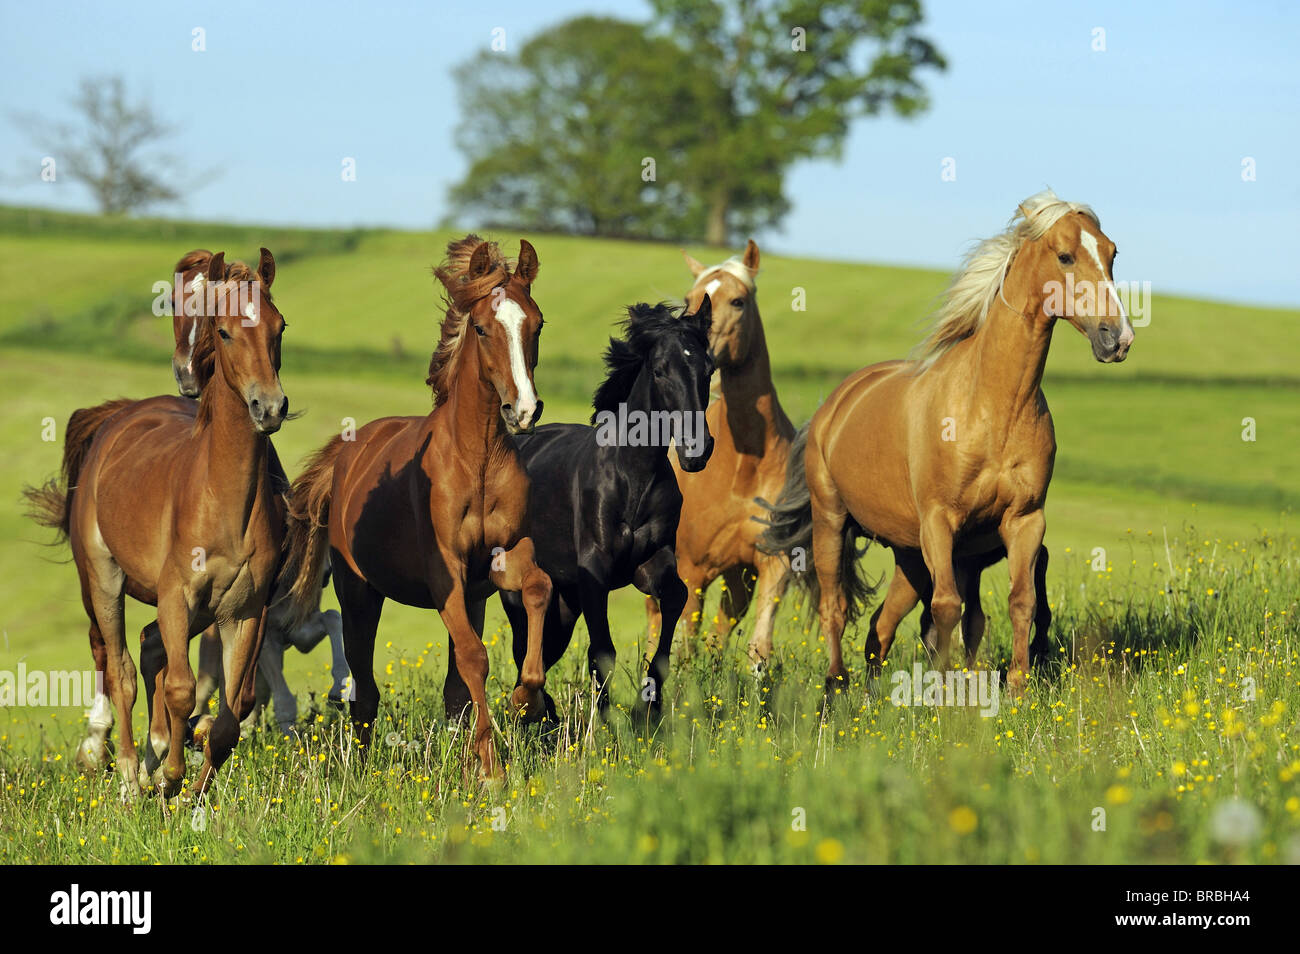 American Saddlebred und Tennessee Walking Horse (Equus ferus caballus), mixed herd of mares and foals in a gallop on a meadow. Stock Photo